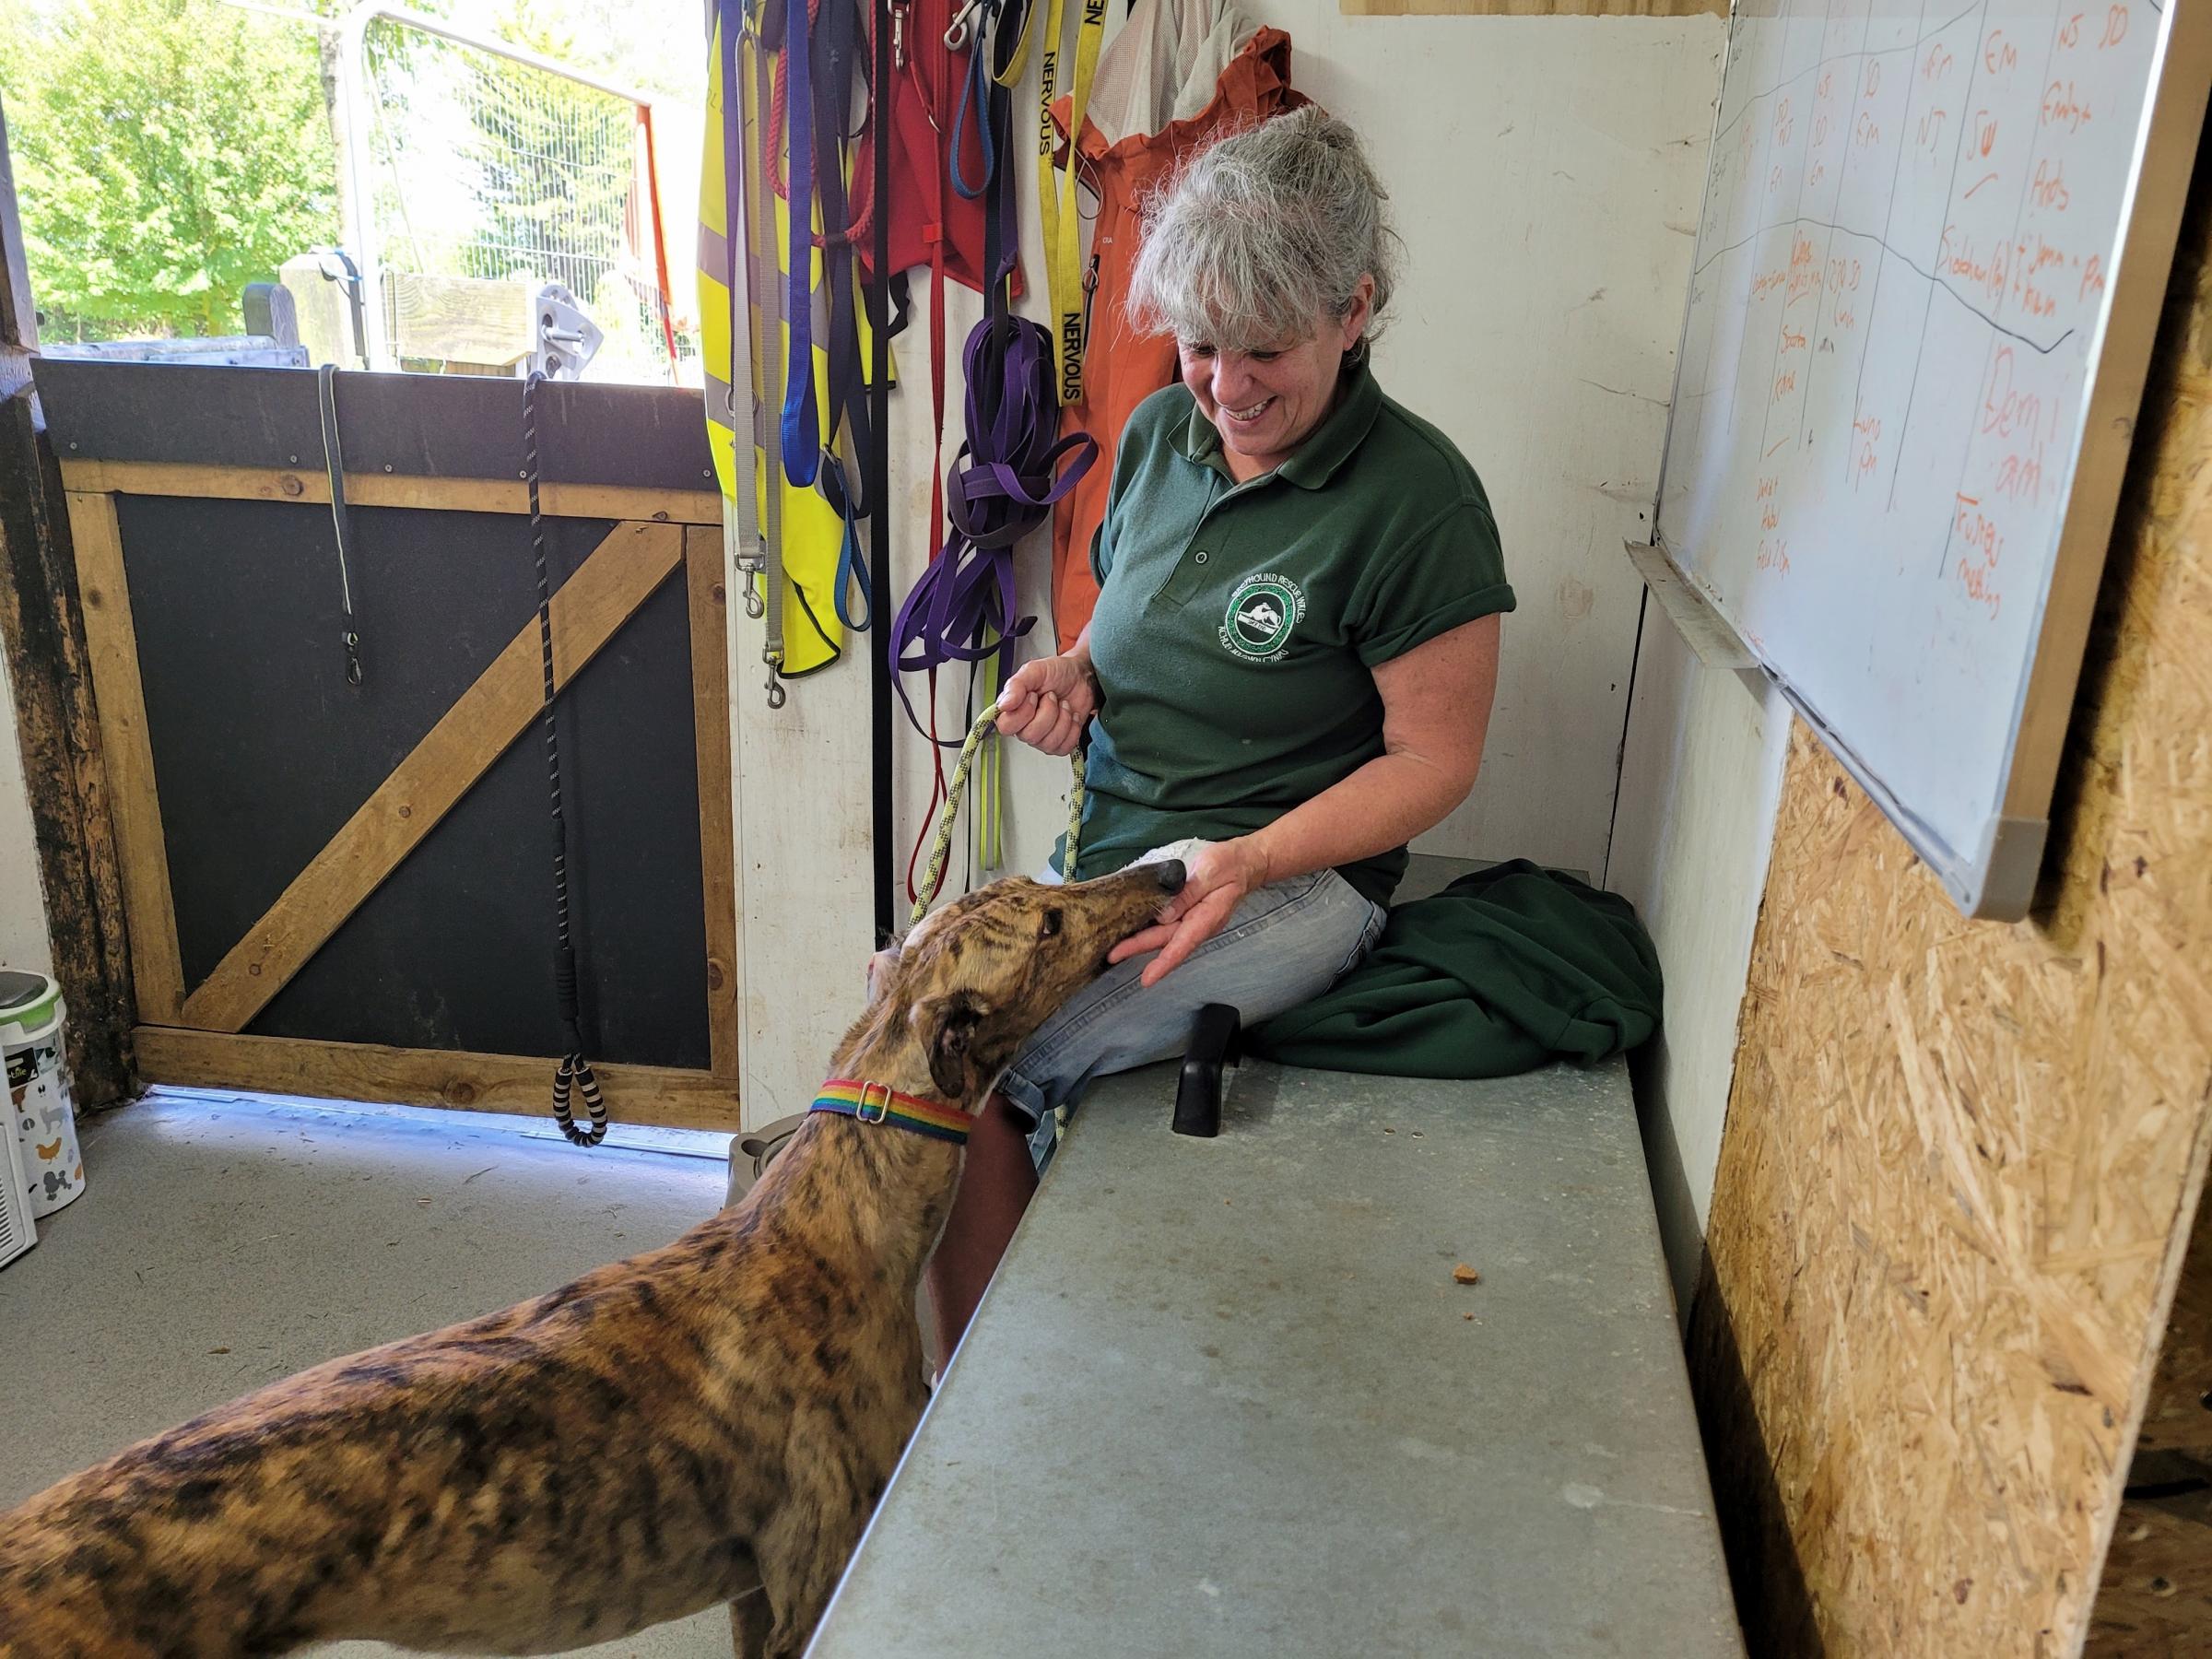 A rescue dog gets some attention at Hillcrest, Garnant (image by Greyhound Rescue Wales and free for use for all BBC wire partners)